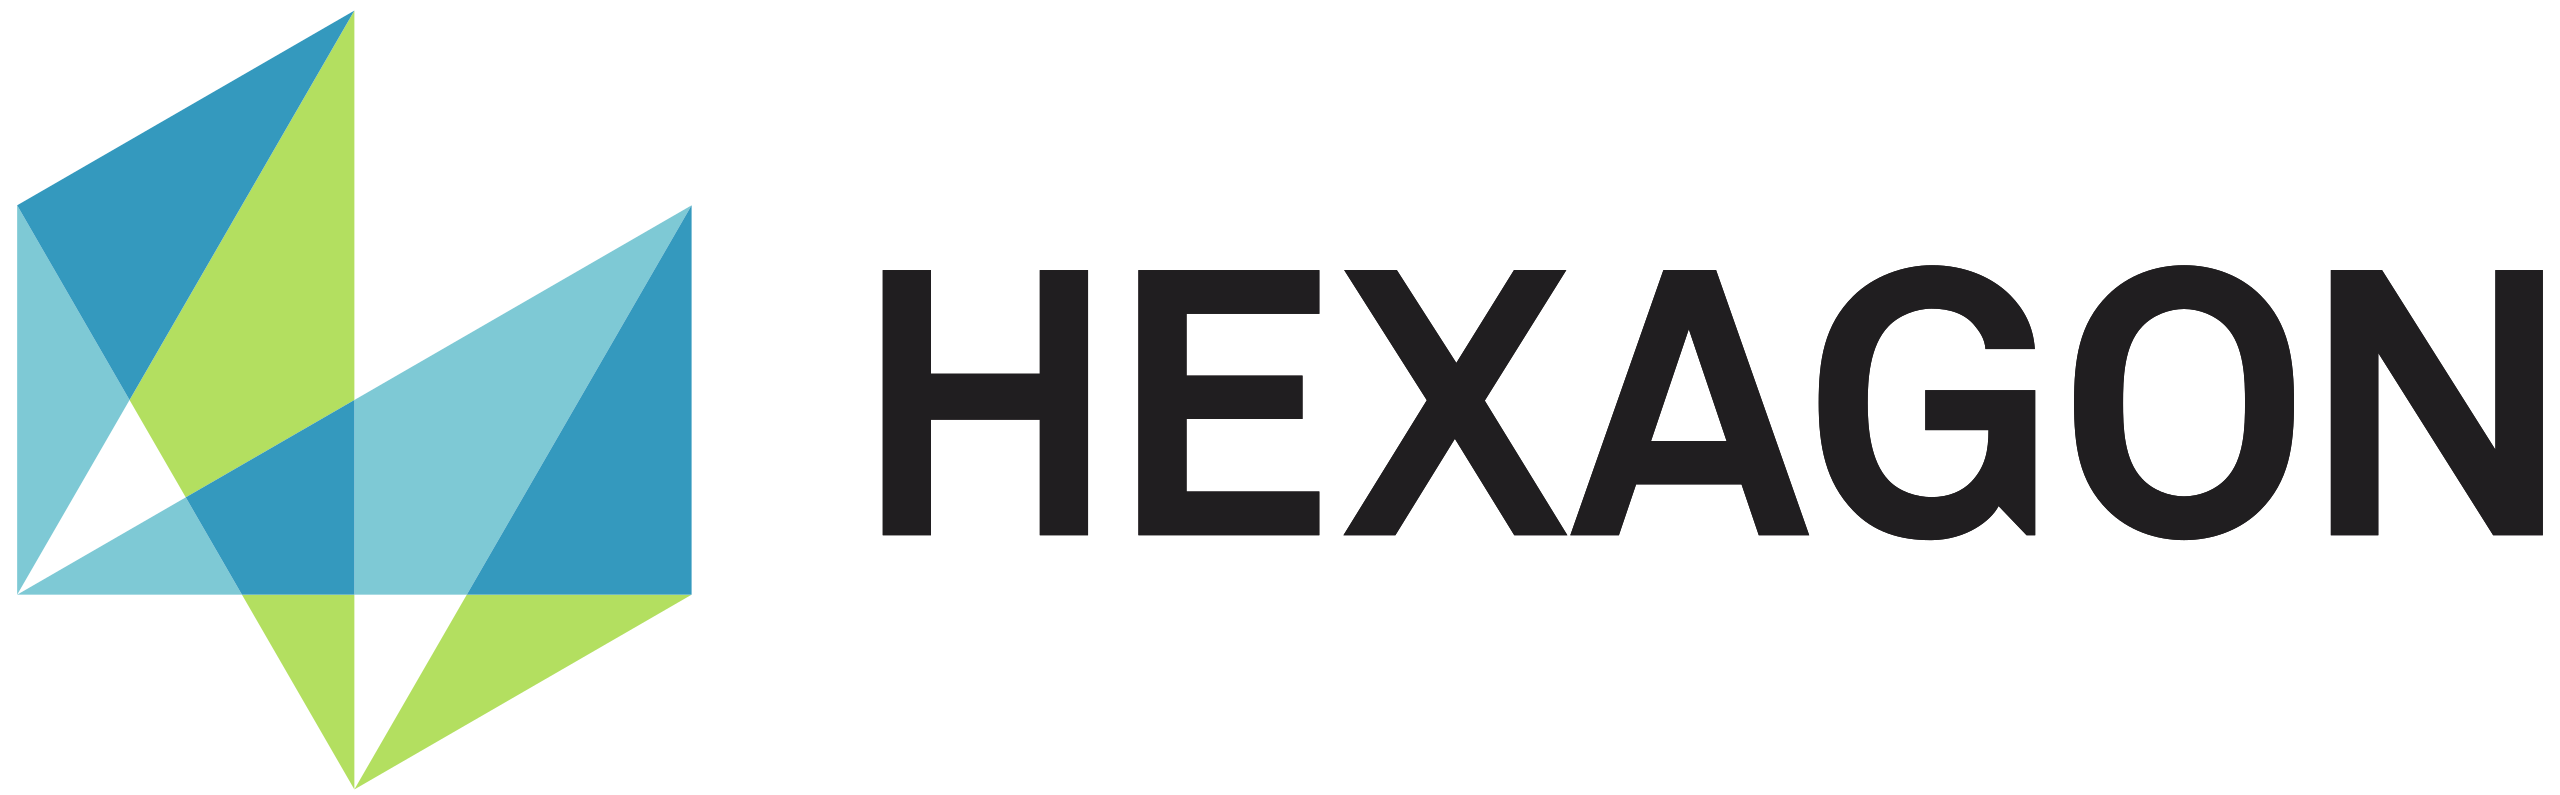 Featured Image For Hexagon  Testimonial